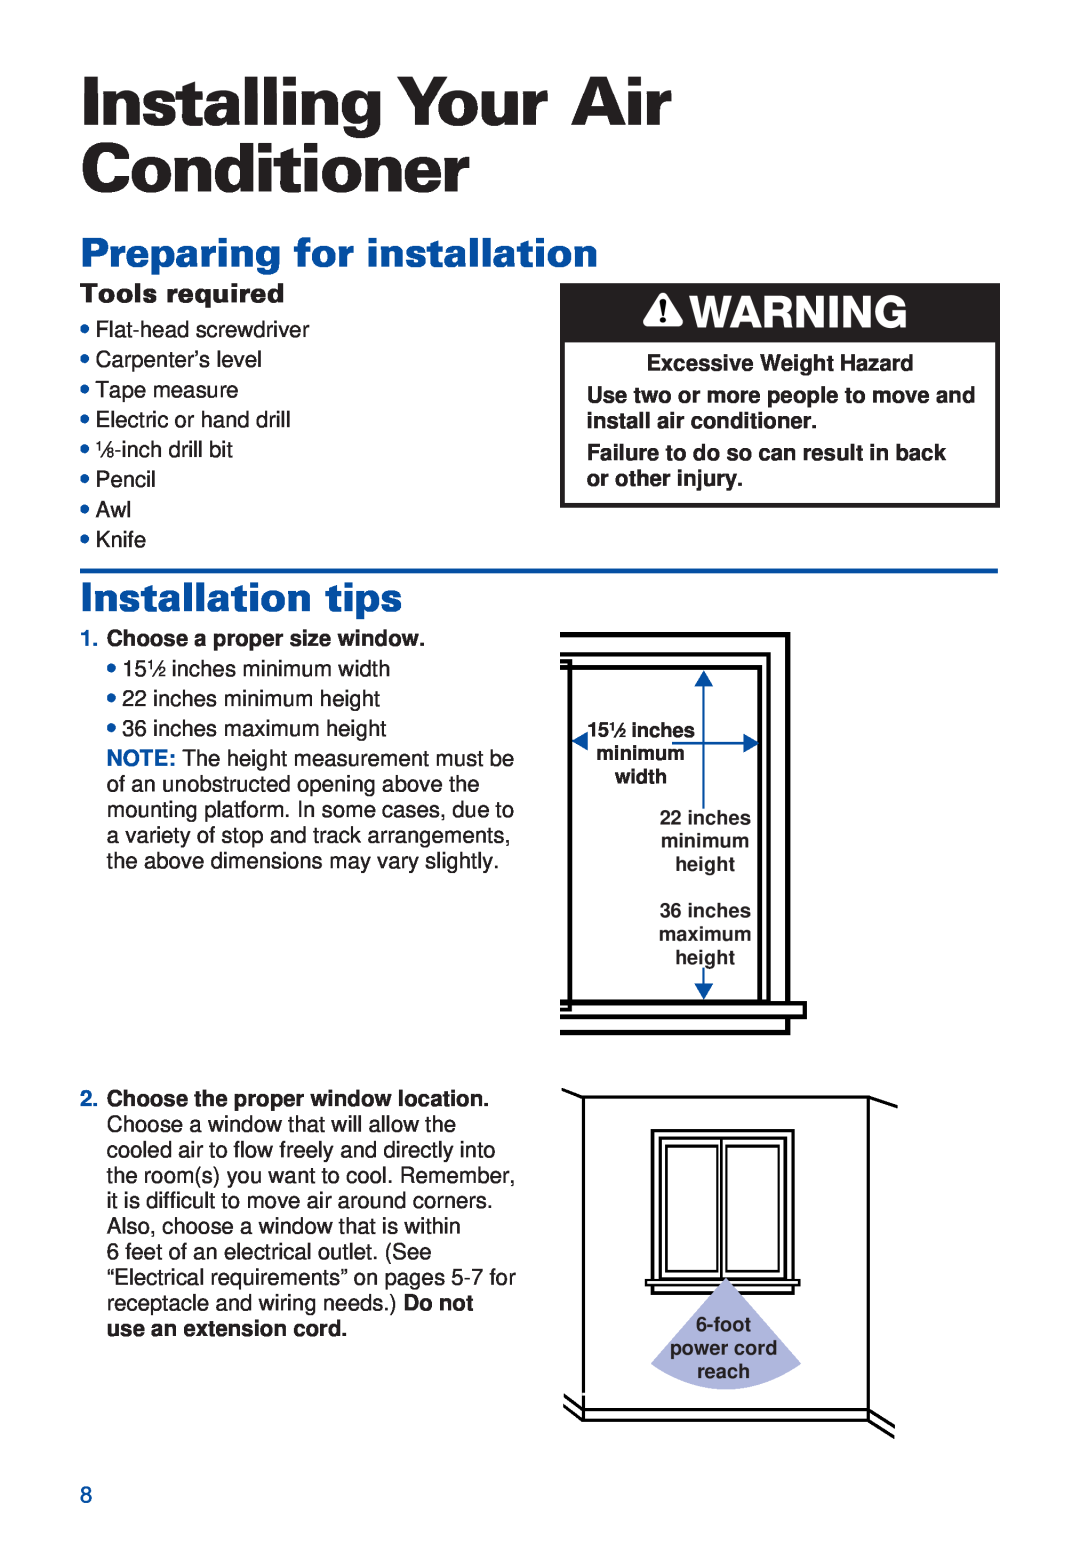 Whirlpool ACS052XH1 warranty Installing Your Air Conditioner, Preparing for installation, Installation tips, Tools required 